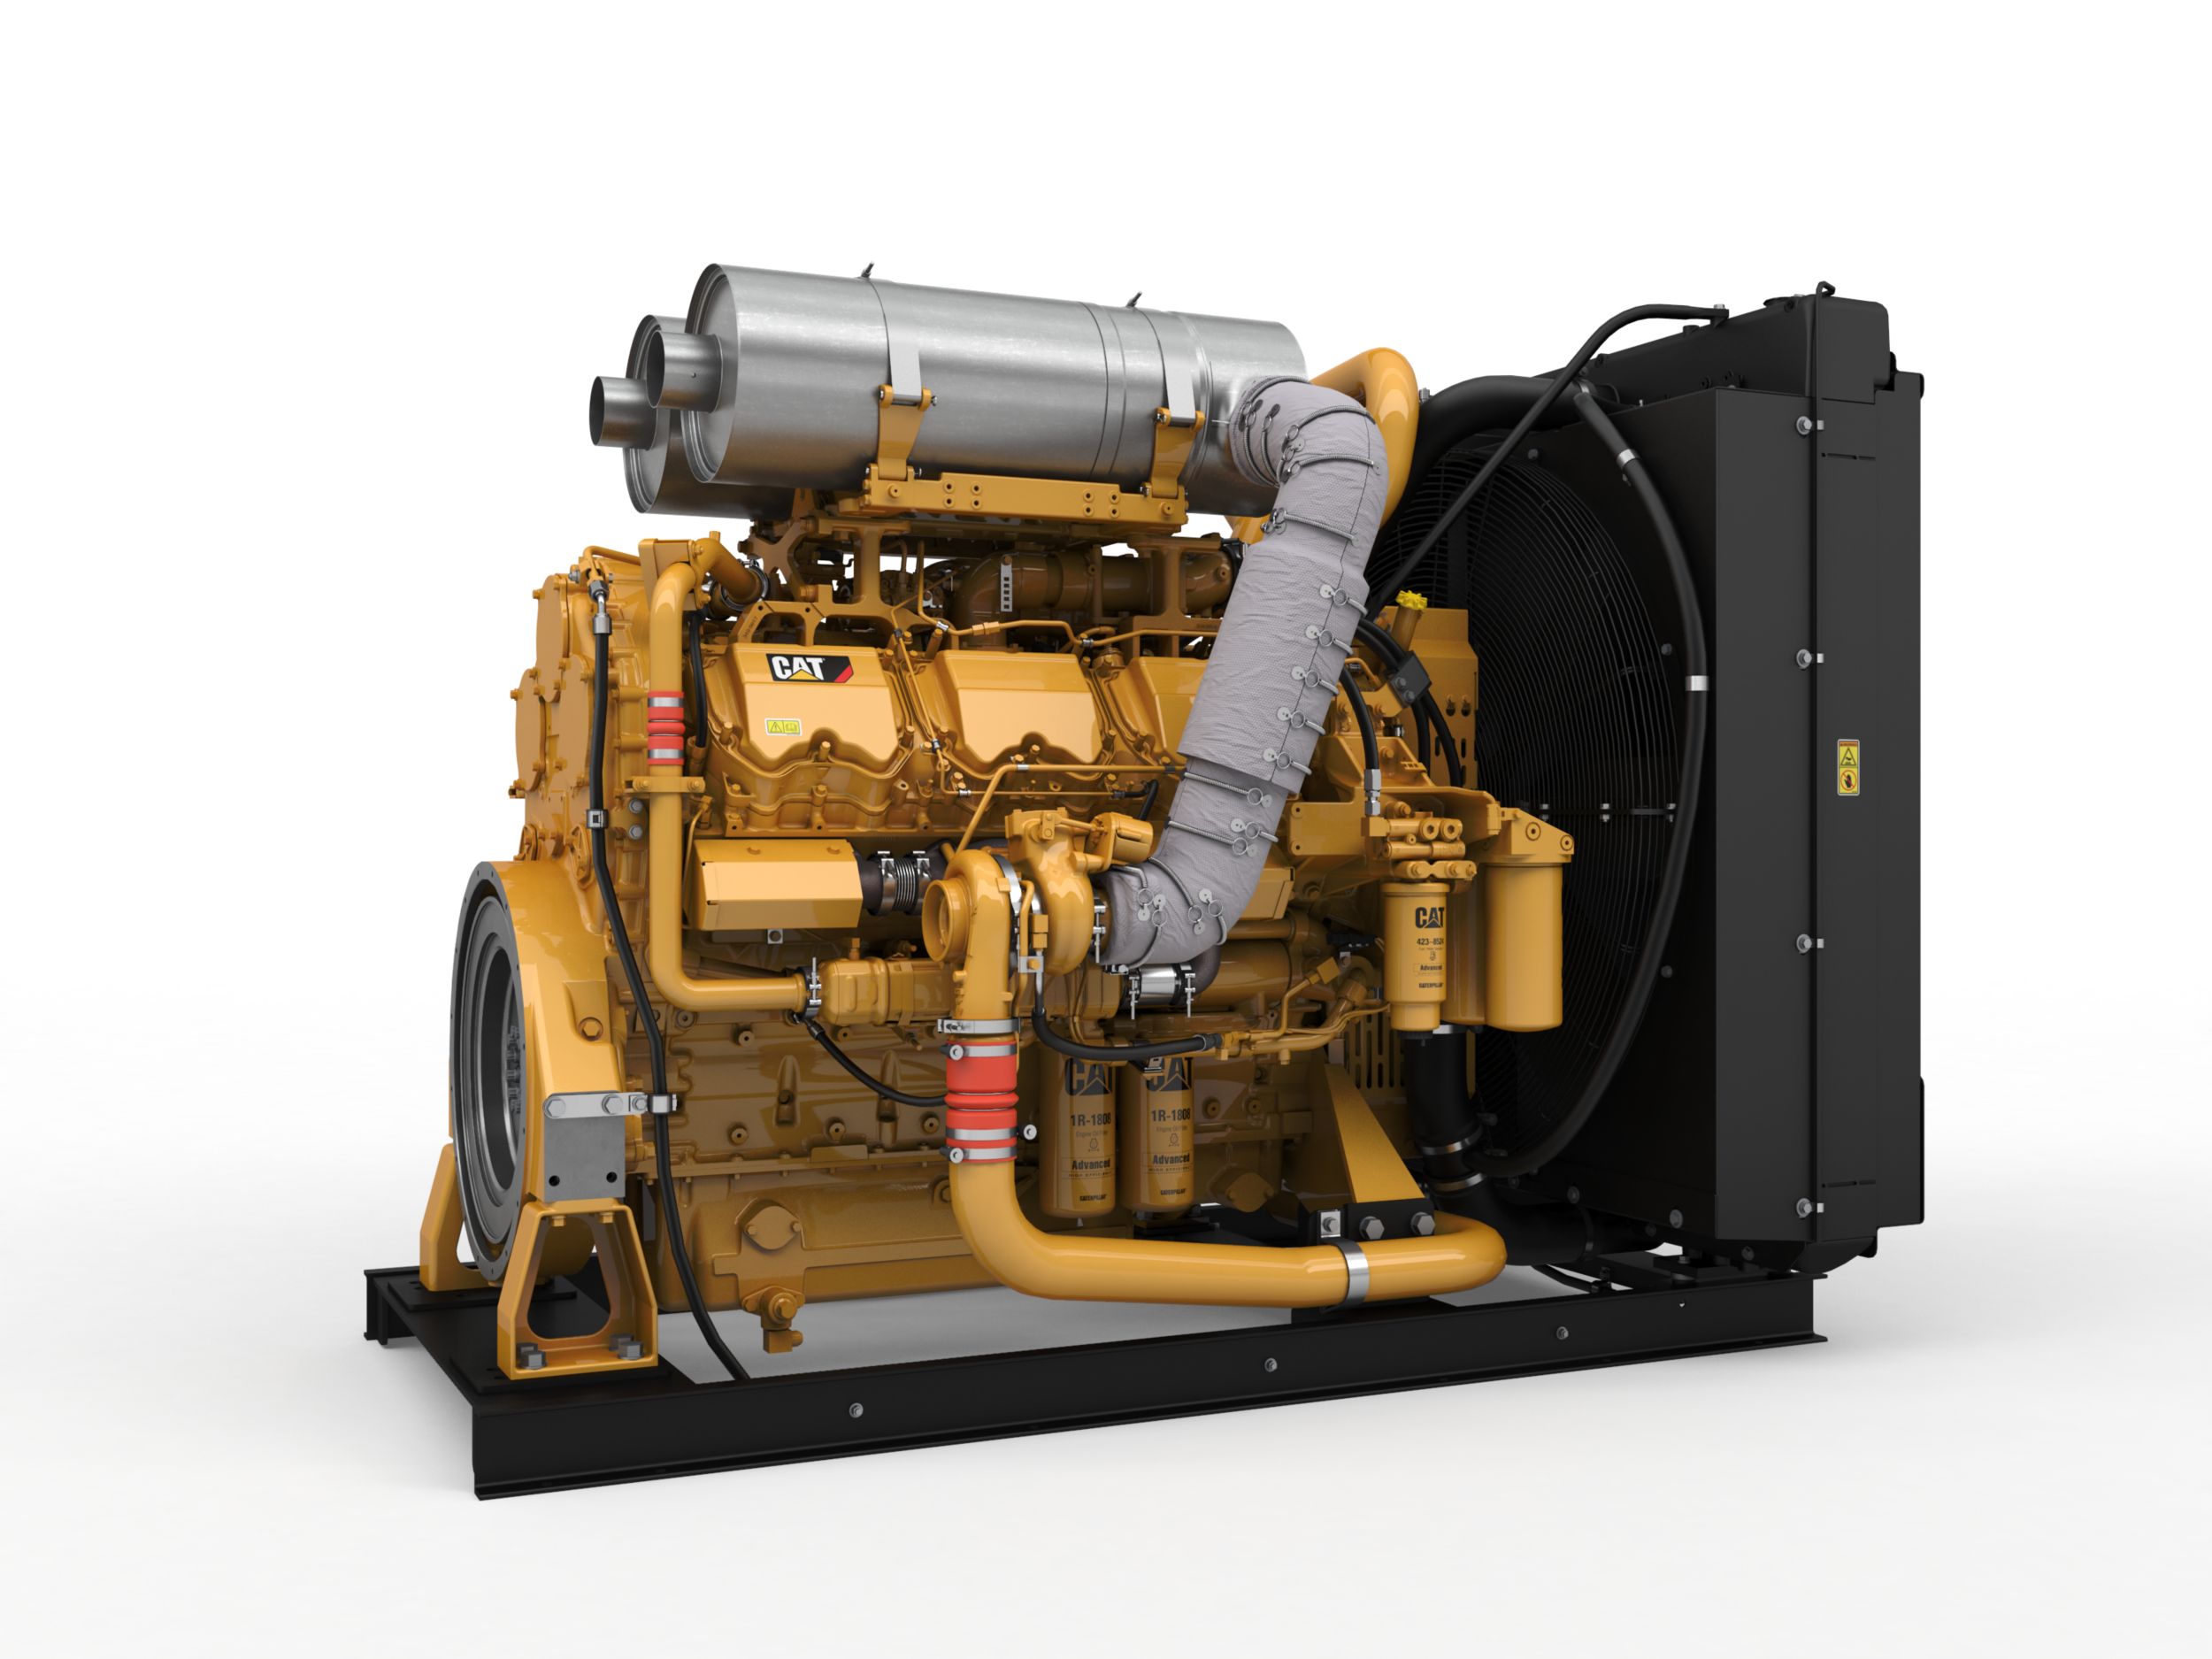 C32 Industrial Power Unit - Highly Regulated